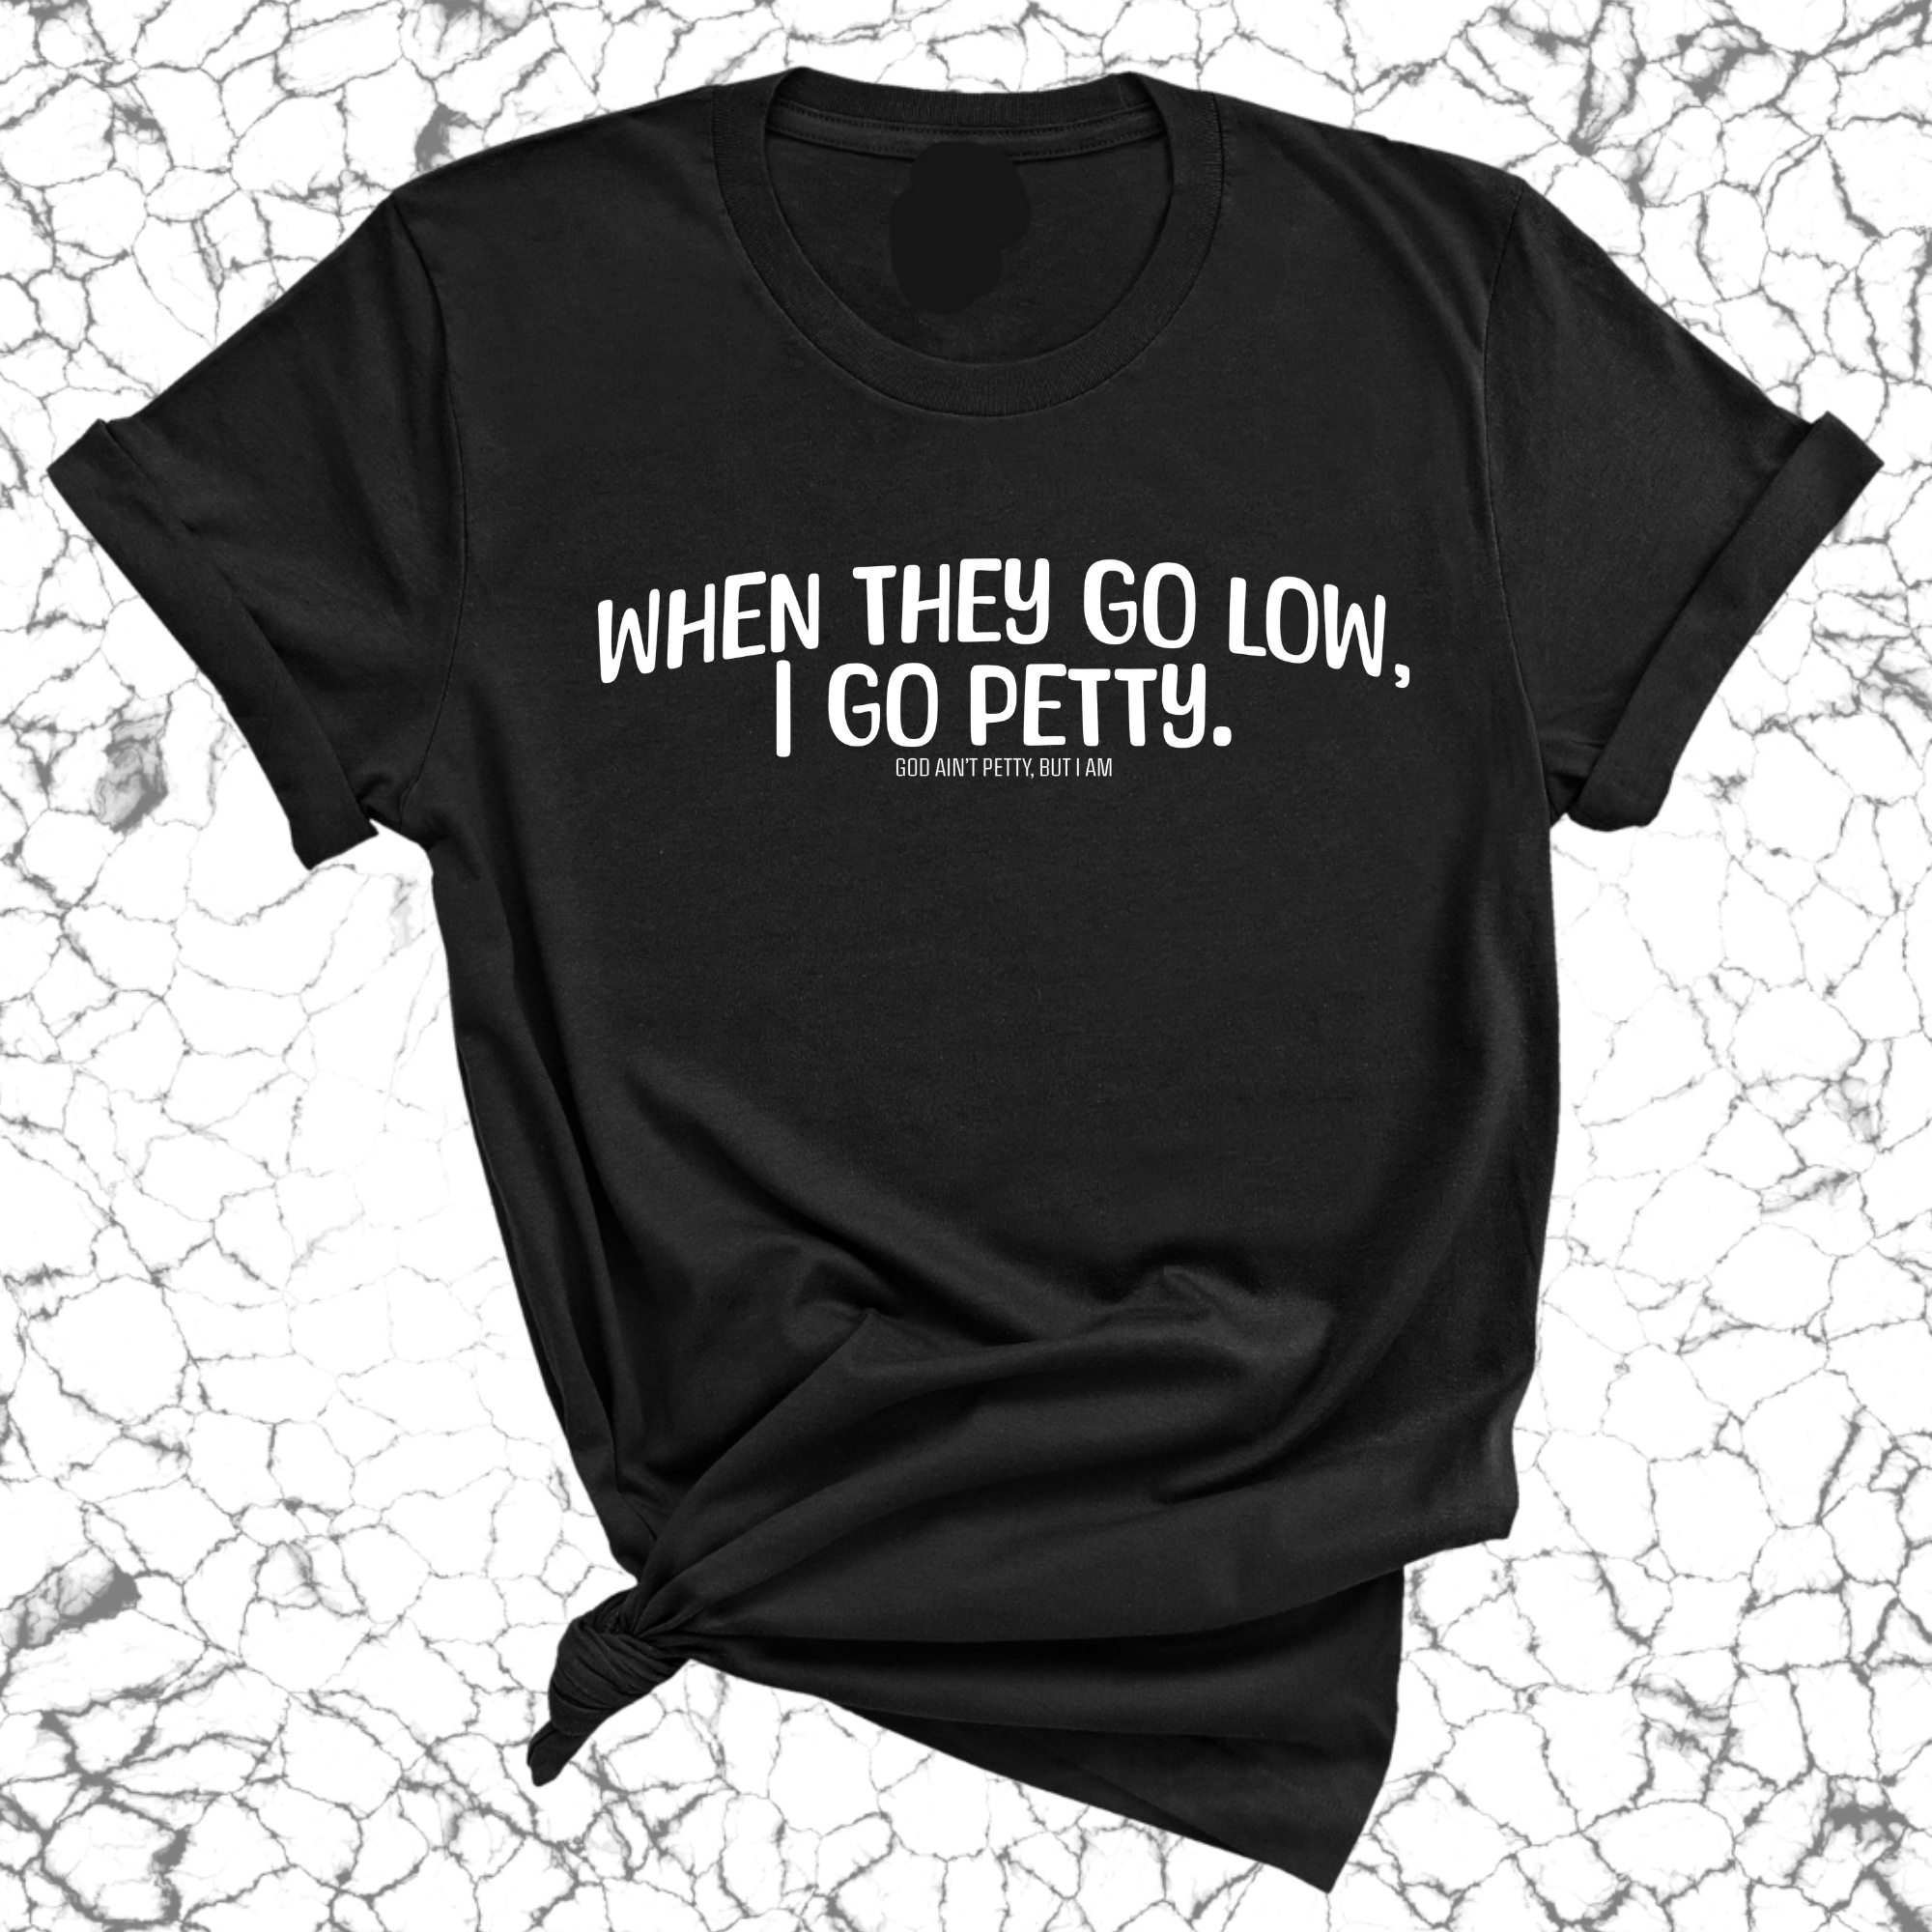 When they go low I go petty Unisex Tee-T-Shirt-The Original God Ain't Petty But I Am